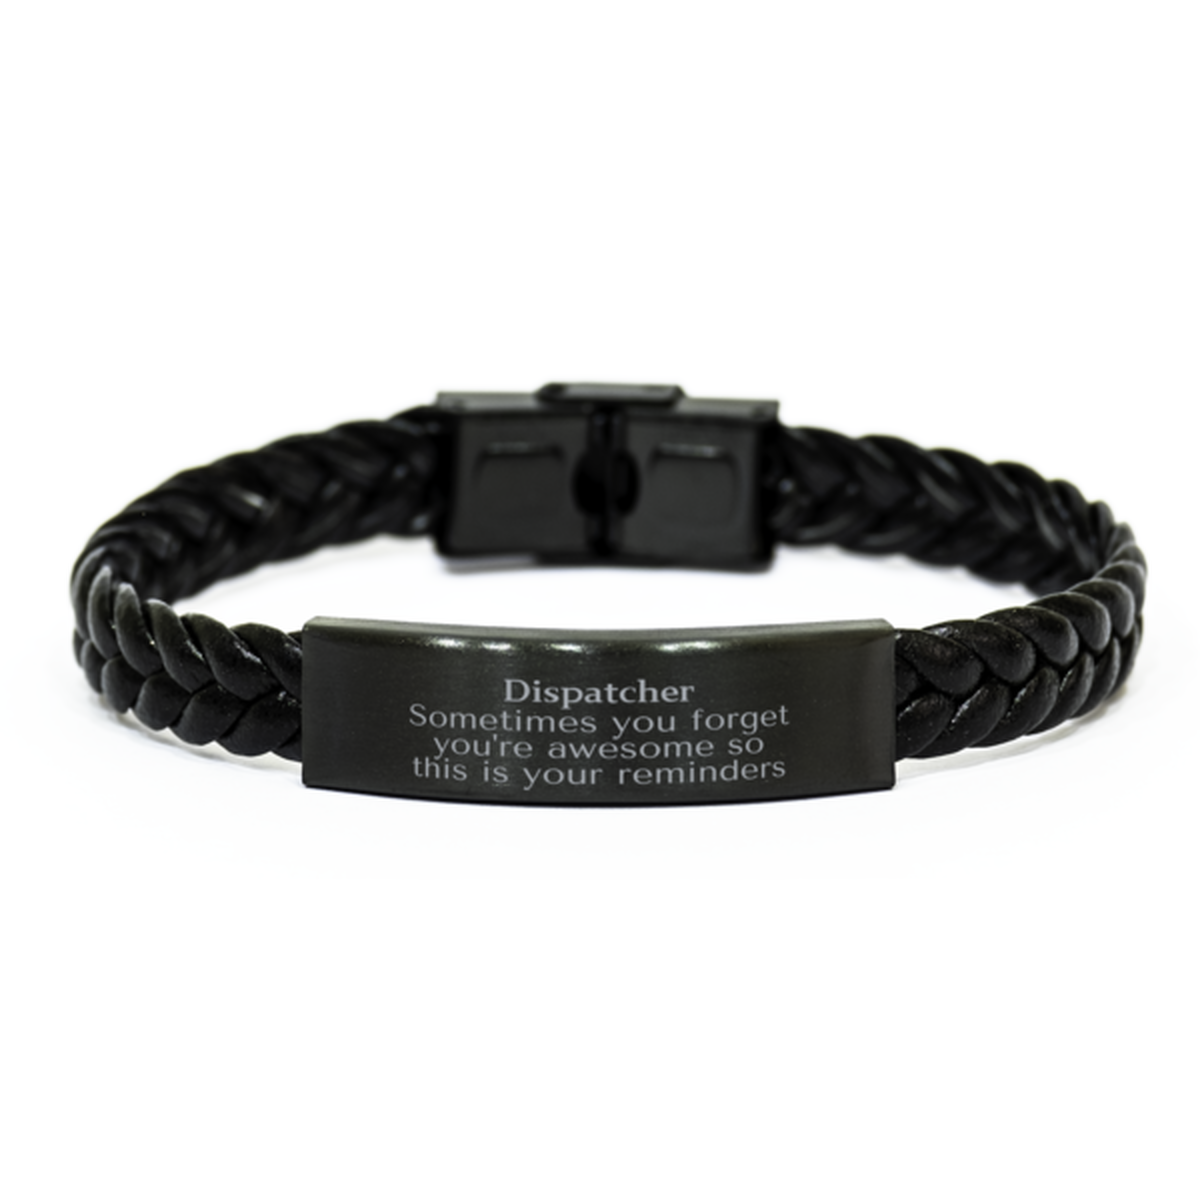 Sentimental Dispatcher Braided Leather Bracelet, Dispatcher Sometimes you forget you're awesome so this is your reminders, Graduation Christmas Birthday Gifts for Dispatcher, Men, Women, Coworkers